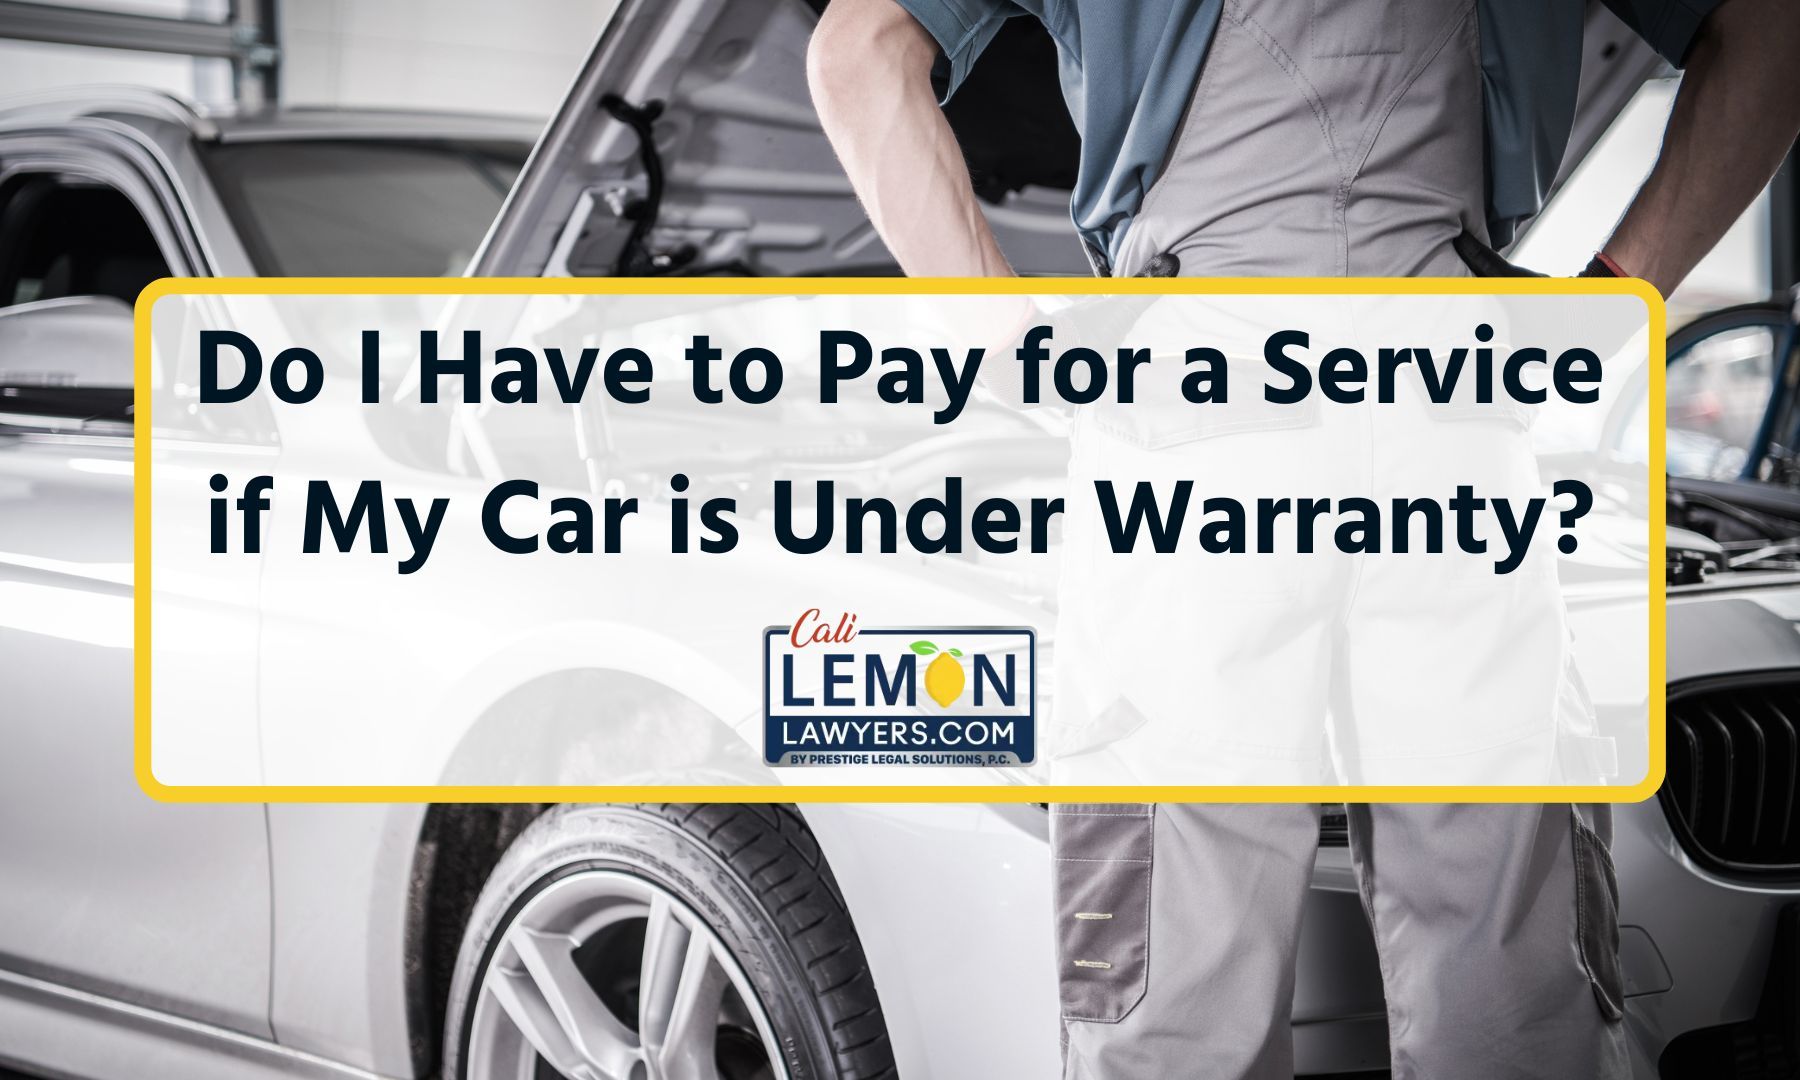 Do I Have to Pay for a Service if My Car is Under Warranty?